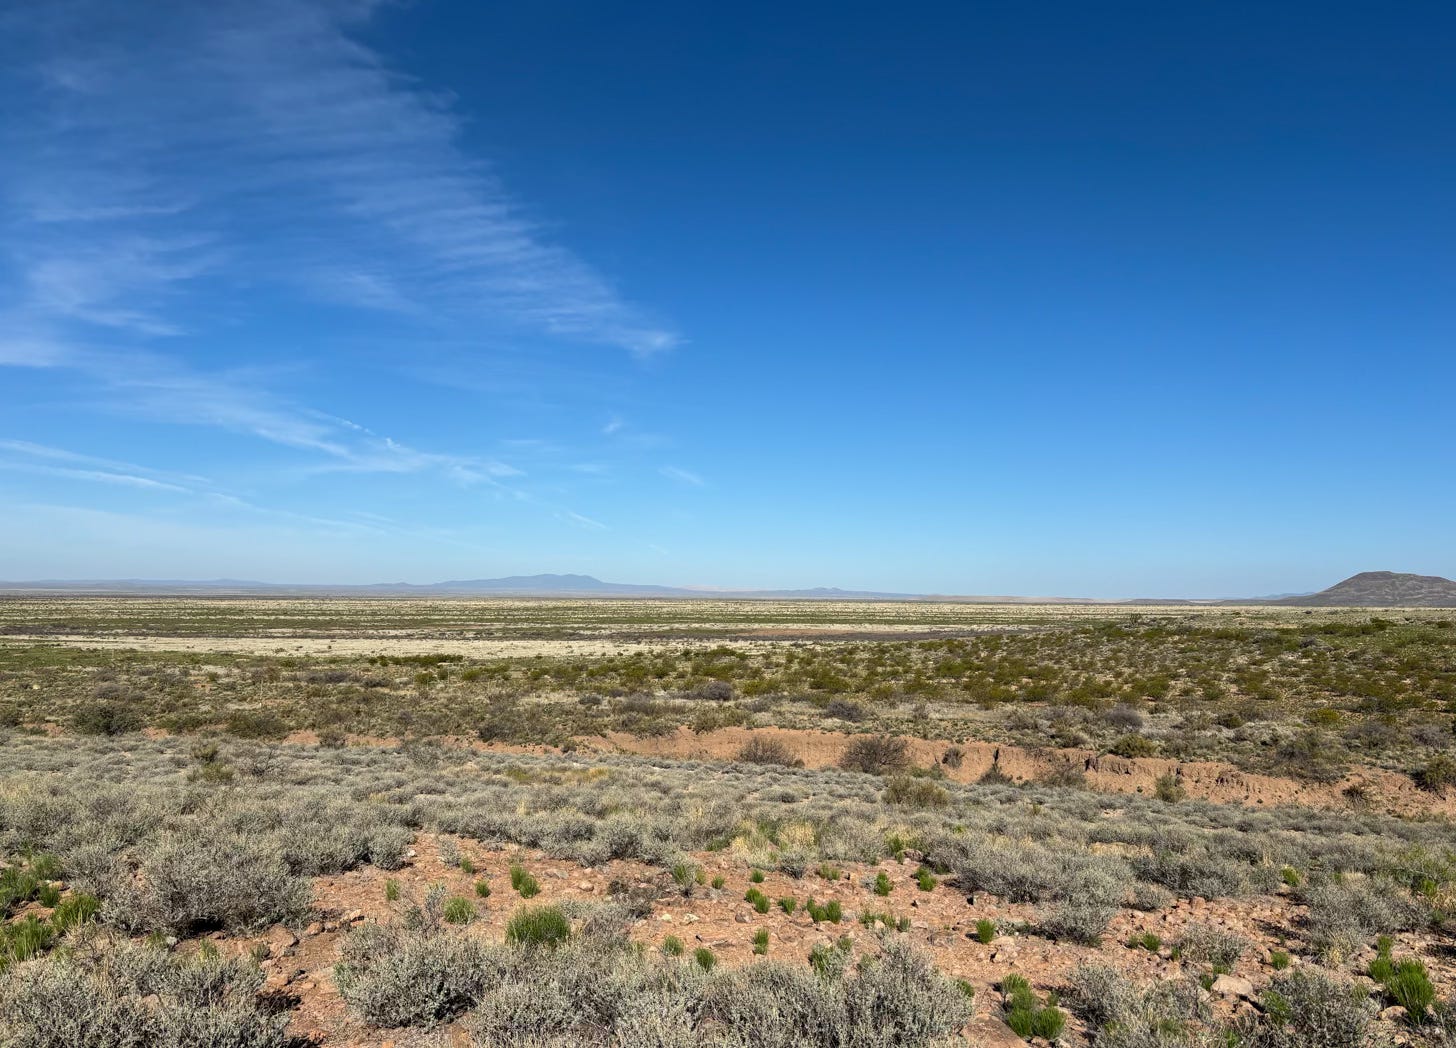 desert landscape with low bushes blue sky and mountains in distance